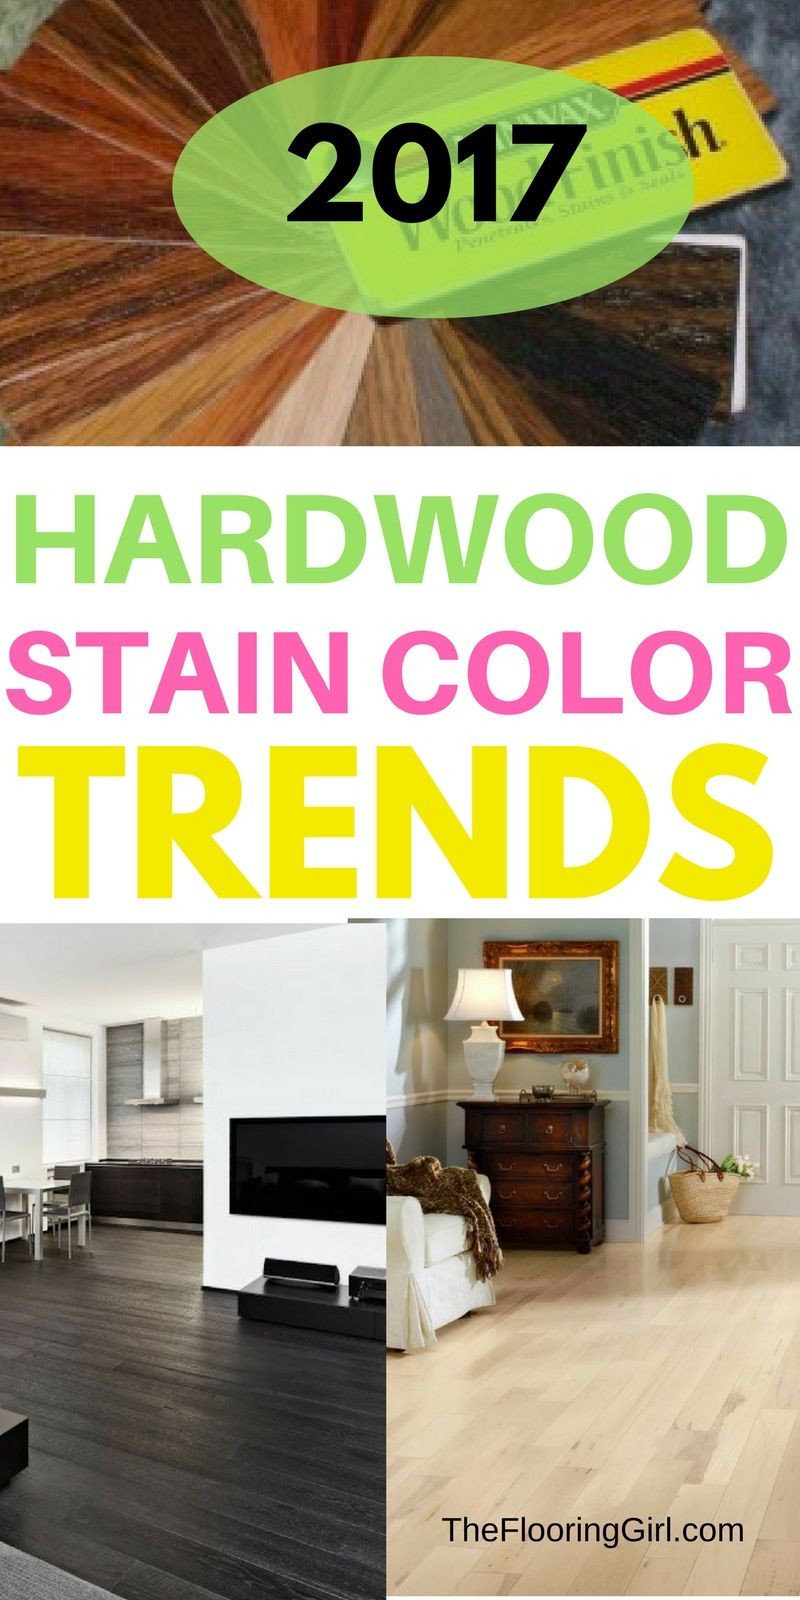 15 Amazing Cost to Resurface Hardwood Floors 2024 free download cost to resurface hardwood floors of hardwood flooring stain color trends 2018 more from the flooring intended for hardwood flooring stain color trends for 2017 hardwood colors that are in s